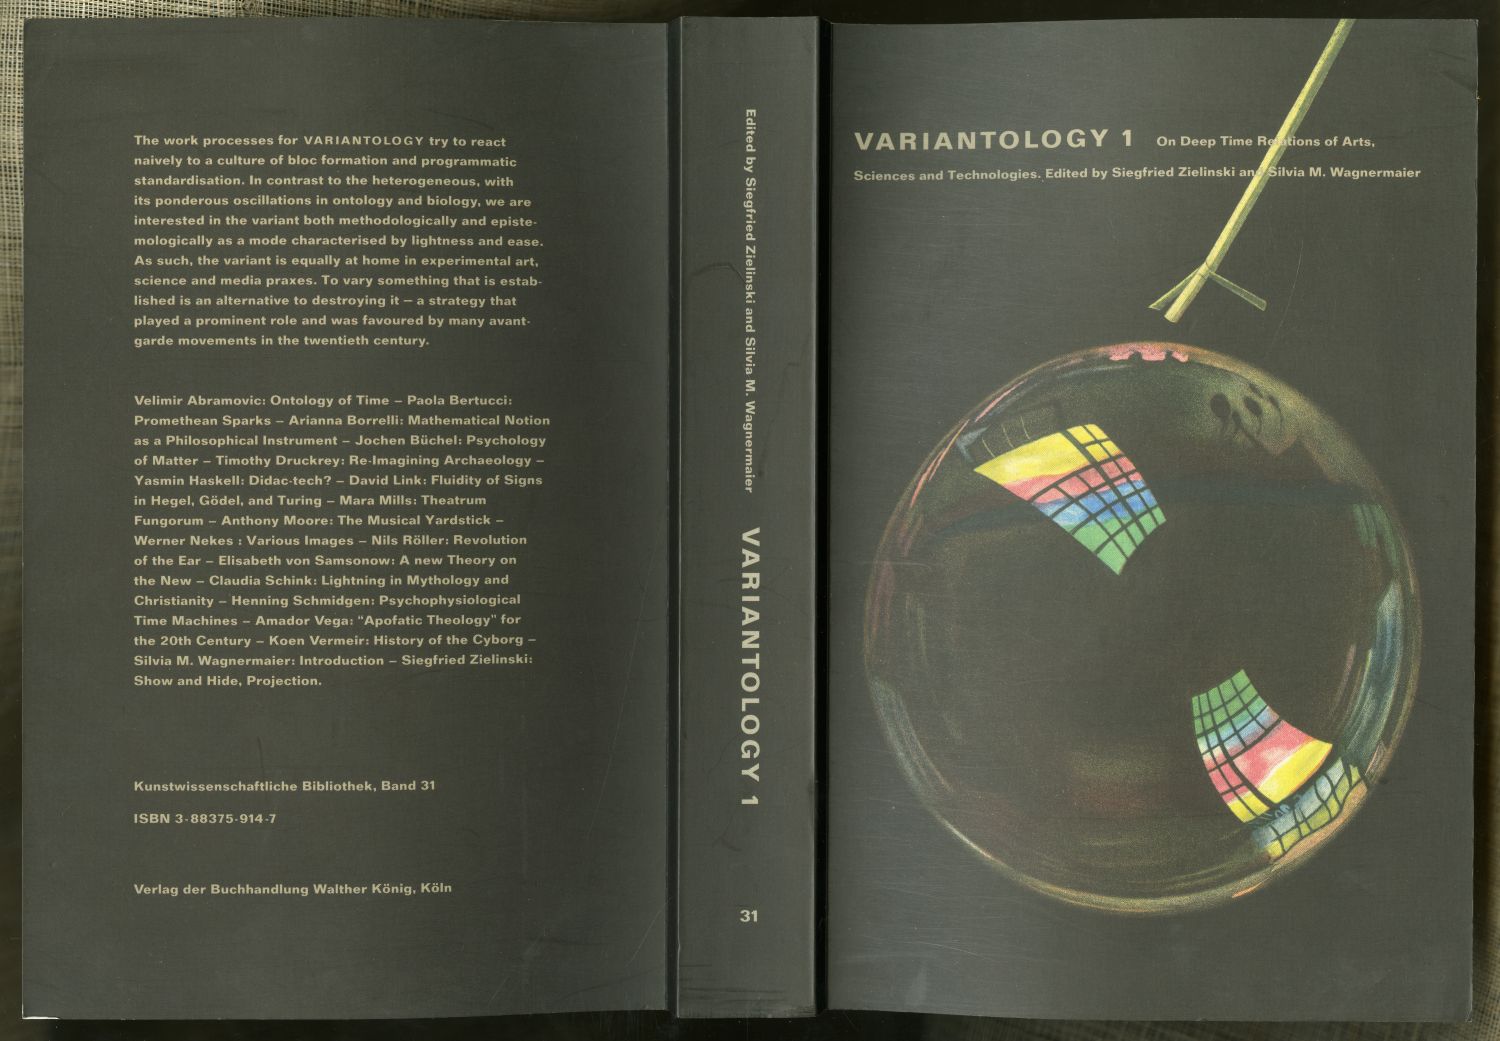 『Variantology 1: On Deep Time Relations of Arts, Sciences and Technologies』表紙